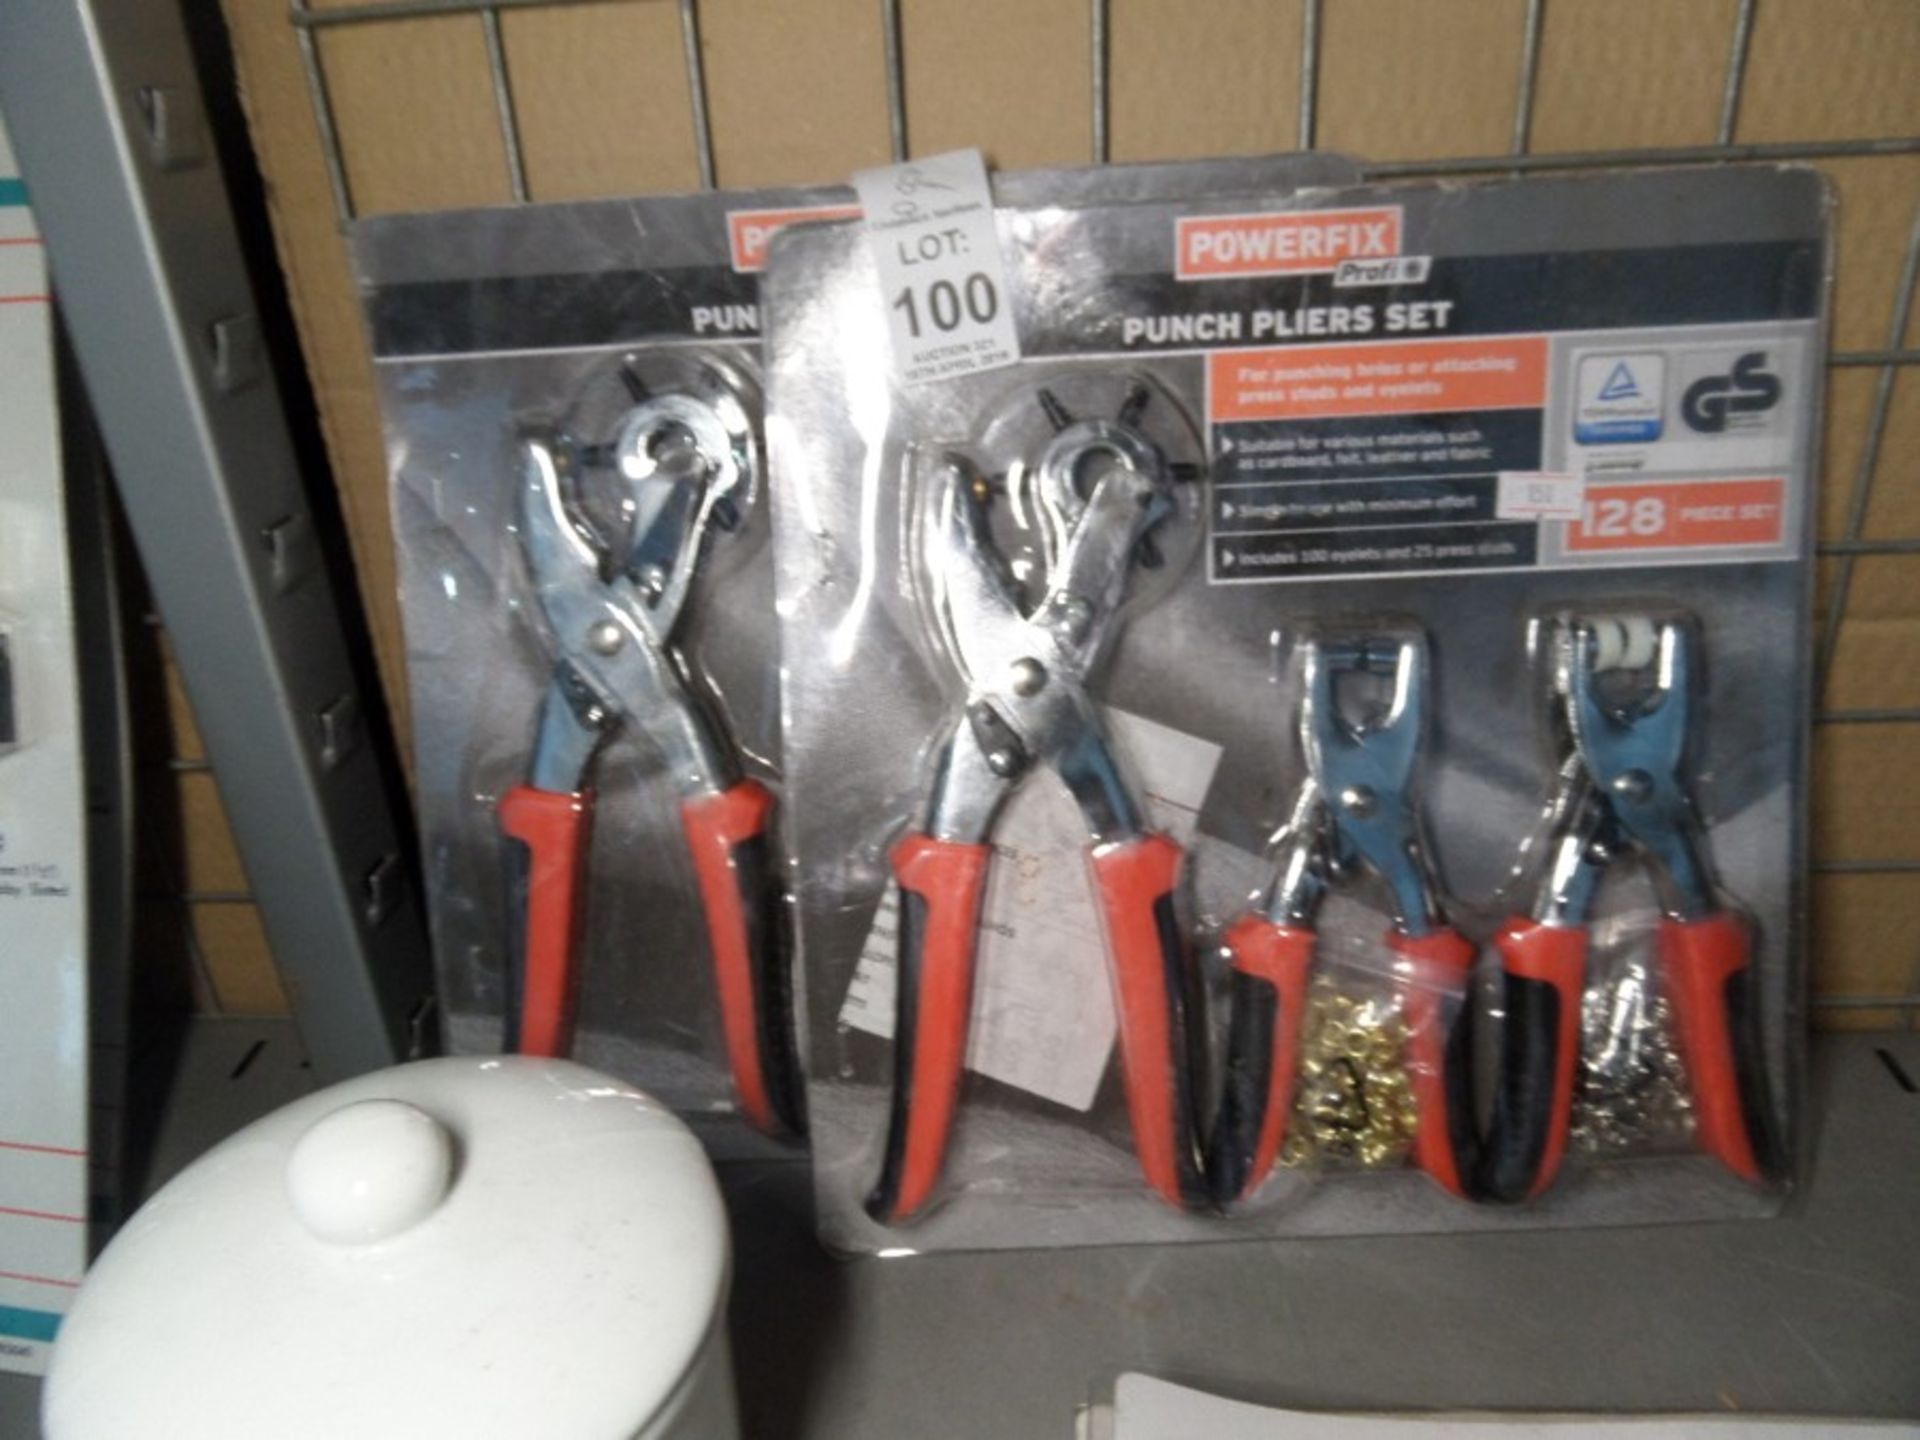 2 NEW PACKS OF PUNCH PLIERS